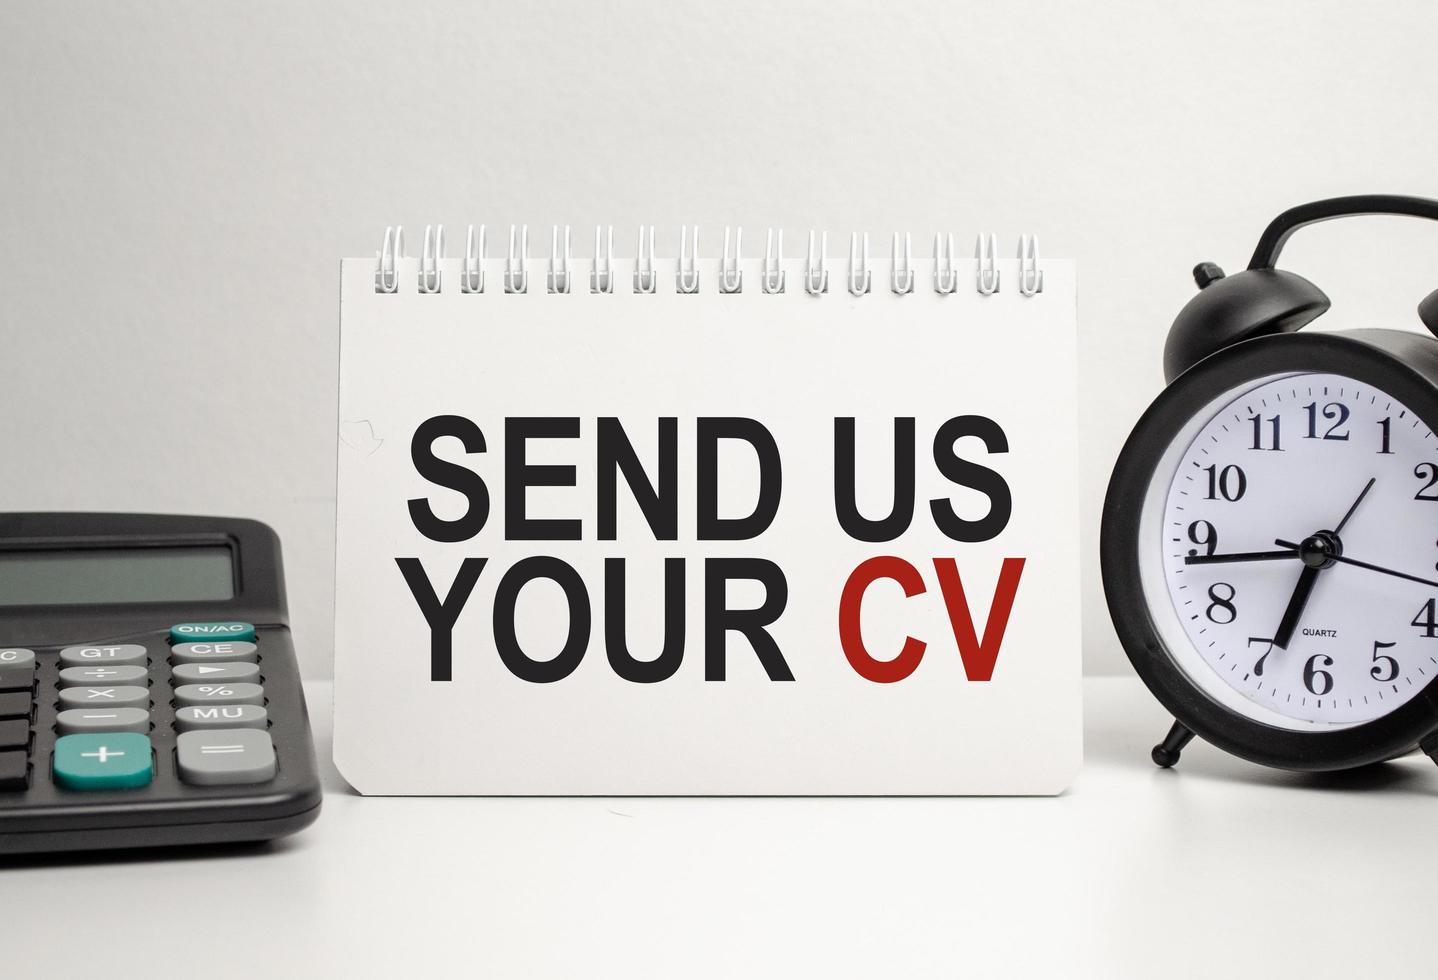 send us your cv words with calculator and clock with notebook photo